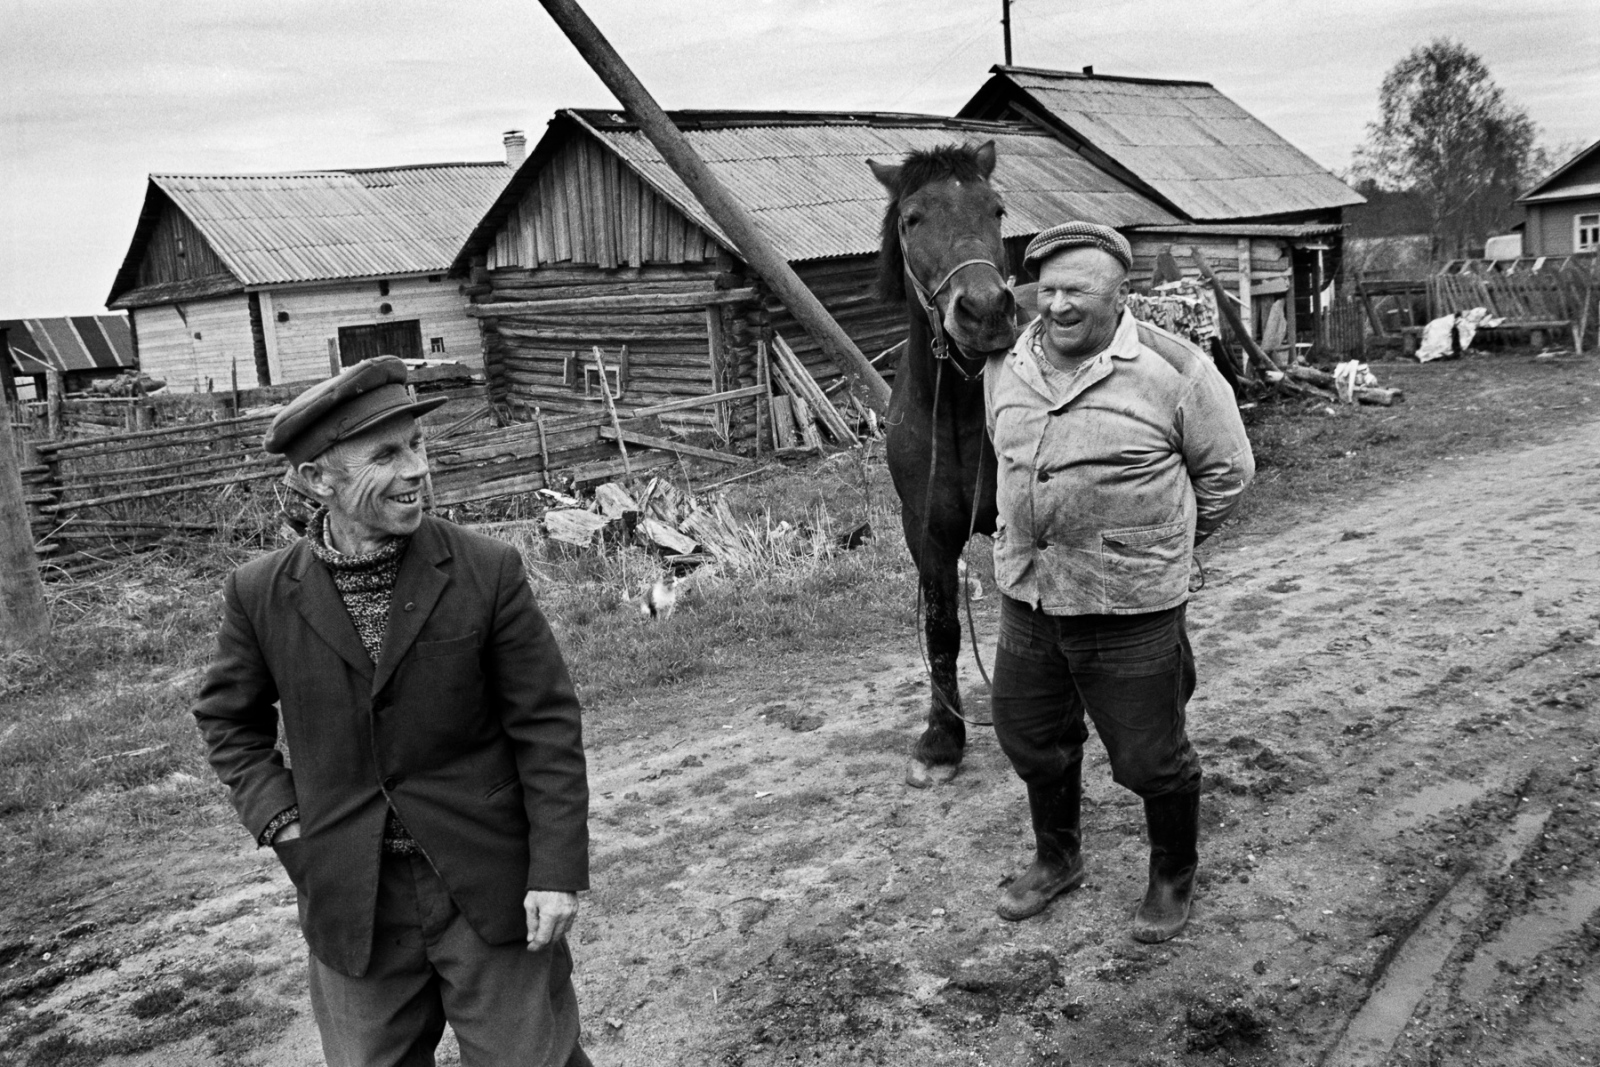 Alexei Gromov (left) and Vasili Semyonov chat on a dirt road in Anufrievo. Vasili is known as the first villager to leave the Communist Party.